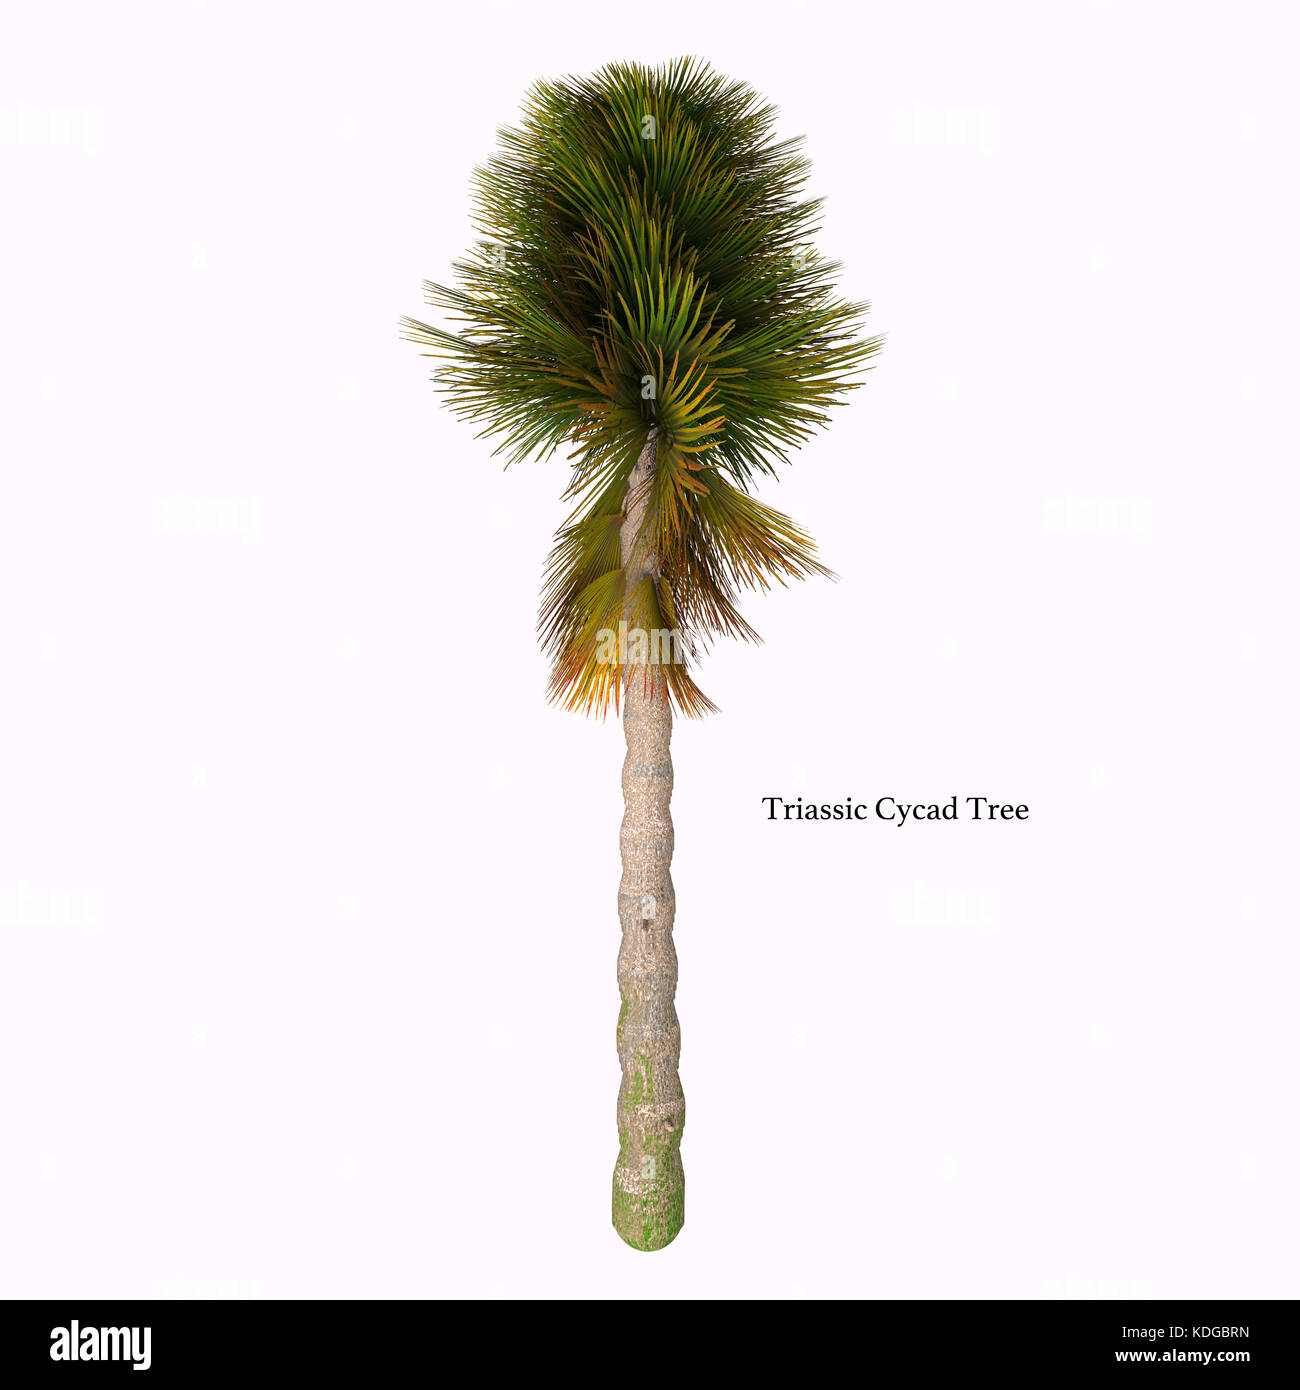 Triassic Cycad Tree with Font - Cycad are seed plants with a long fossil history that were more abundant and more diverse than they are today. Stock Photo